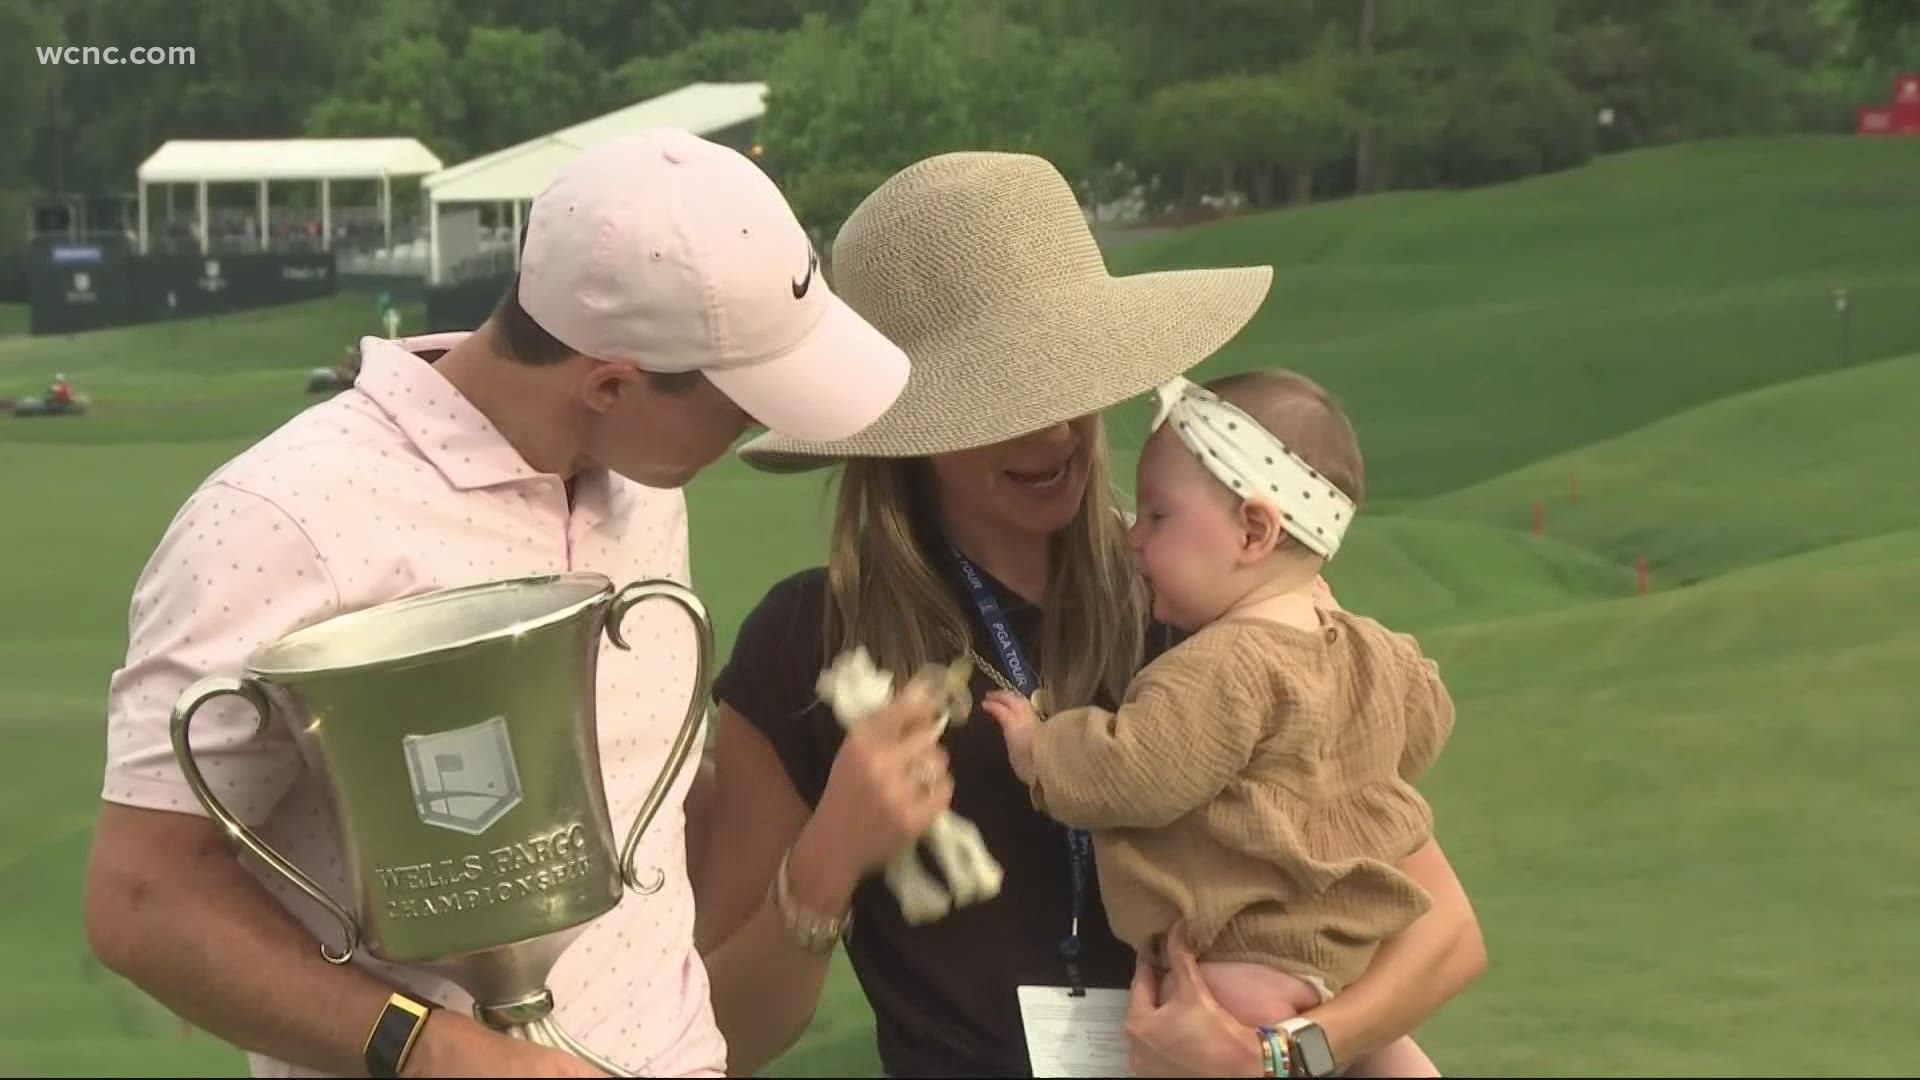 Rory McIlroy's wife, Erica, was celebrating her first Mother's Day, toting the couple's 8-month-old daughter as Rory won the championship.